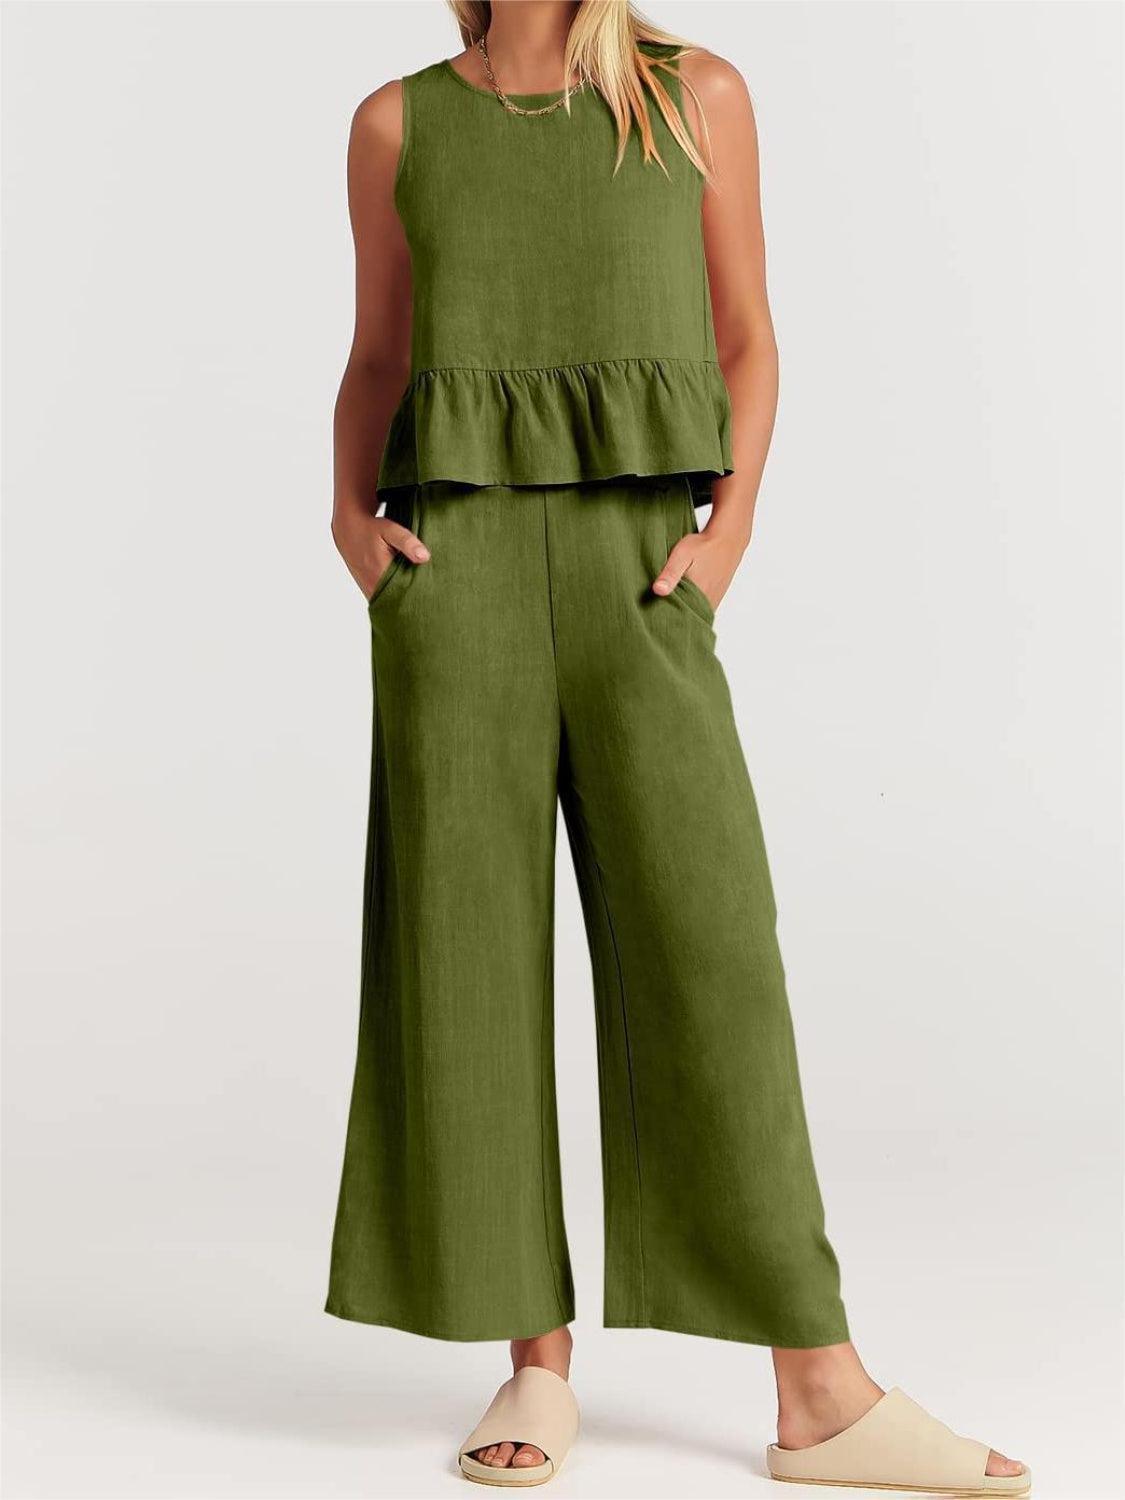 a woman wearing a green top and wide legged pants